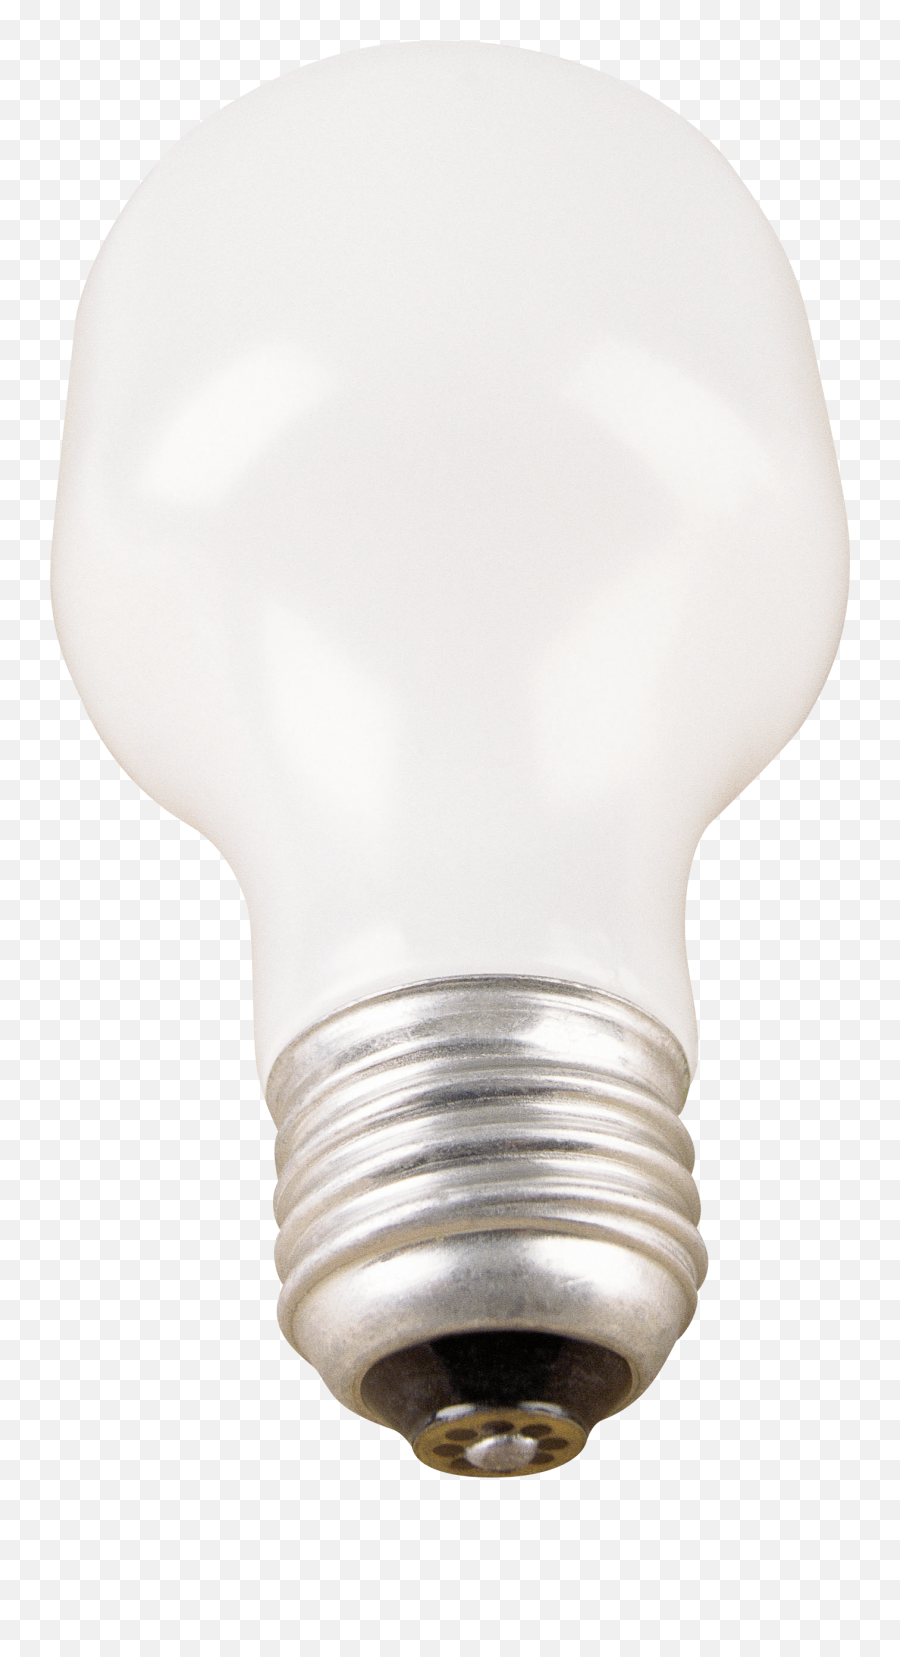 Download Free Png Lamp Image - Lamp,Searchlight Png